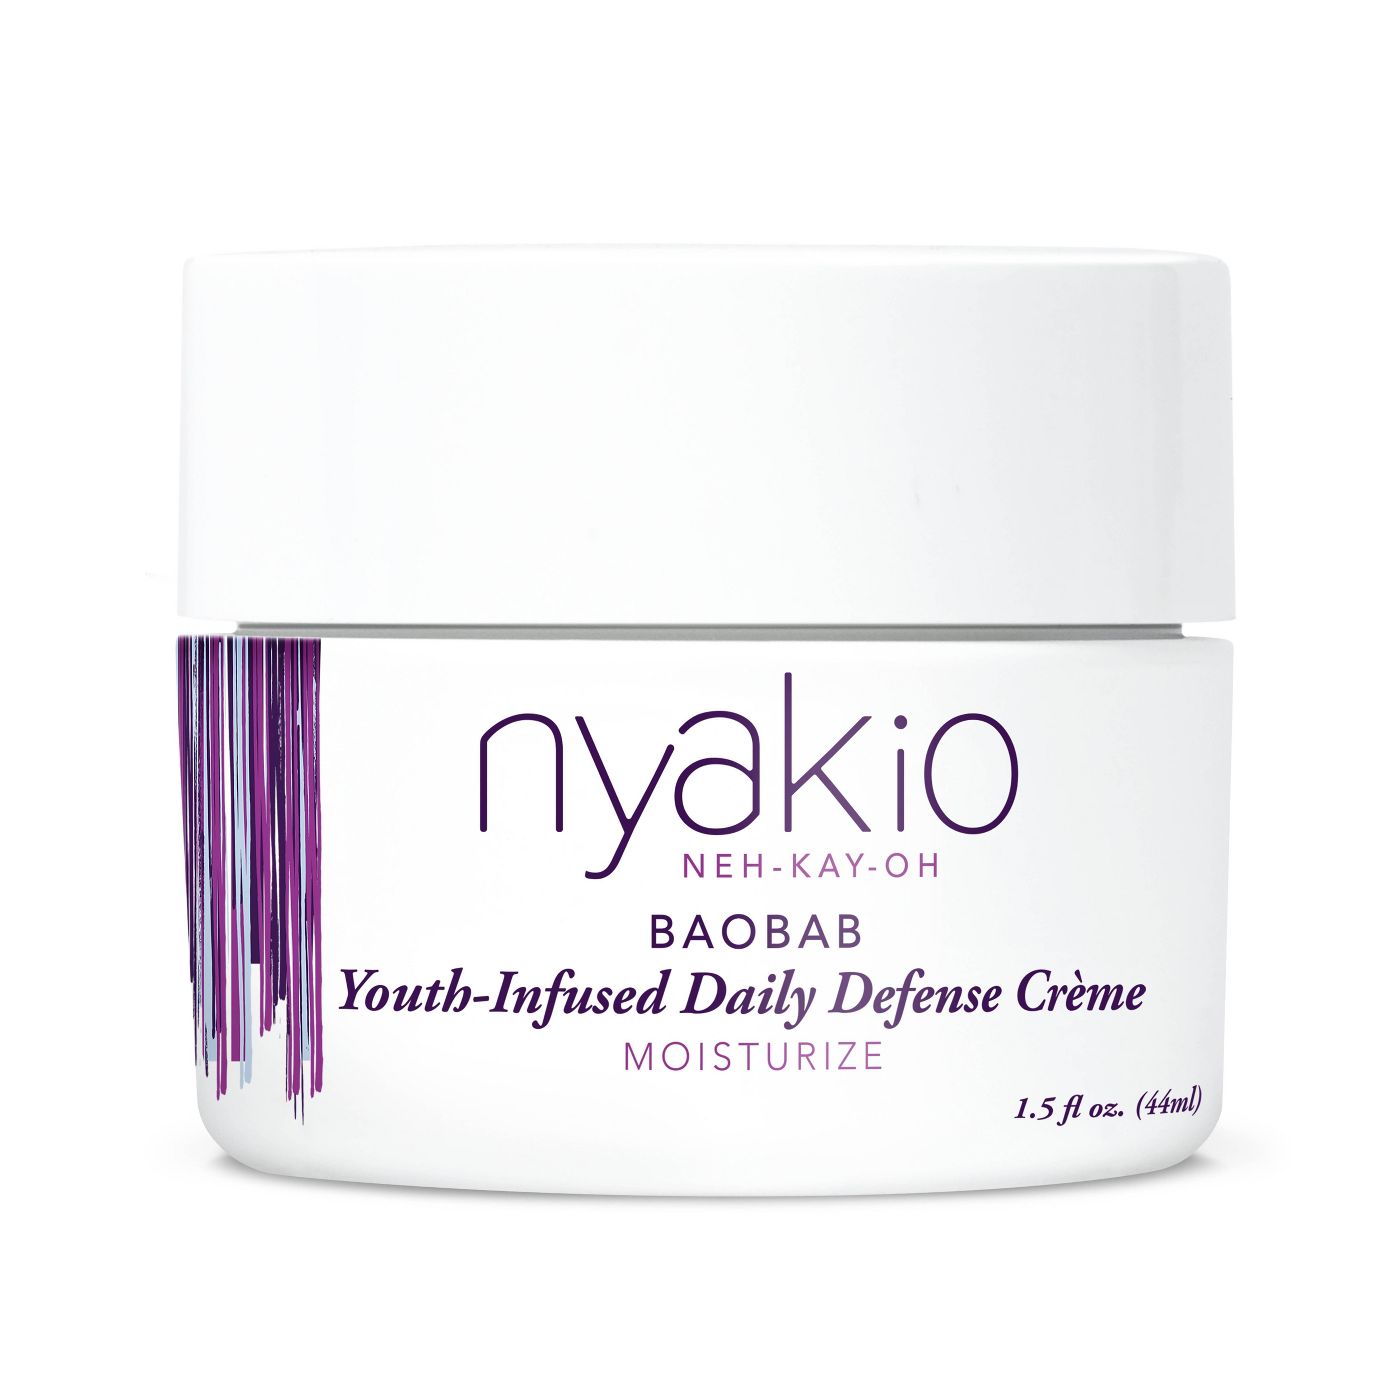 Baobab Youth-Infused Daily Defense Creme